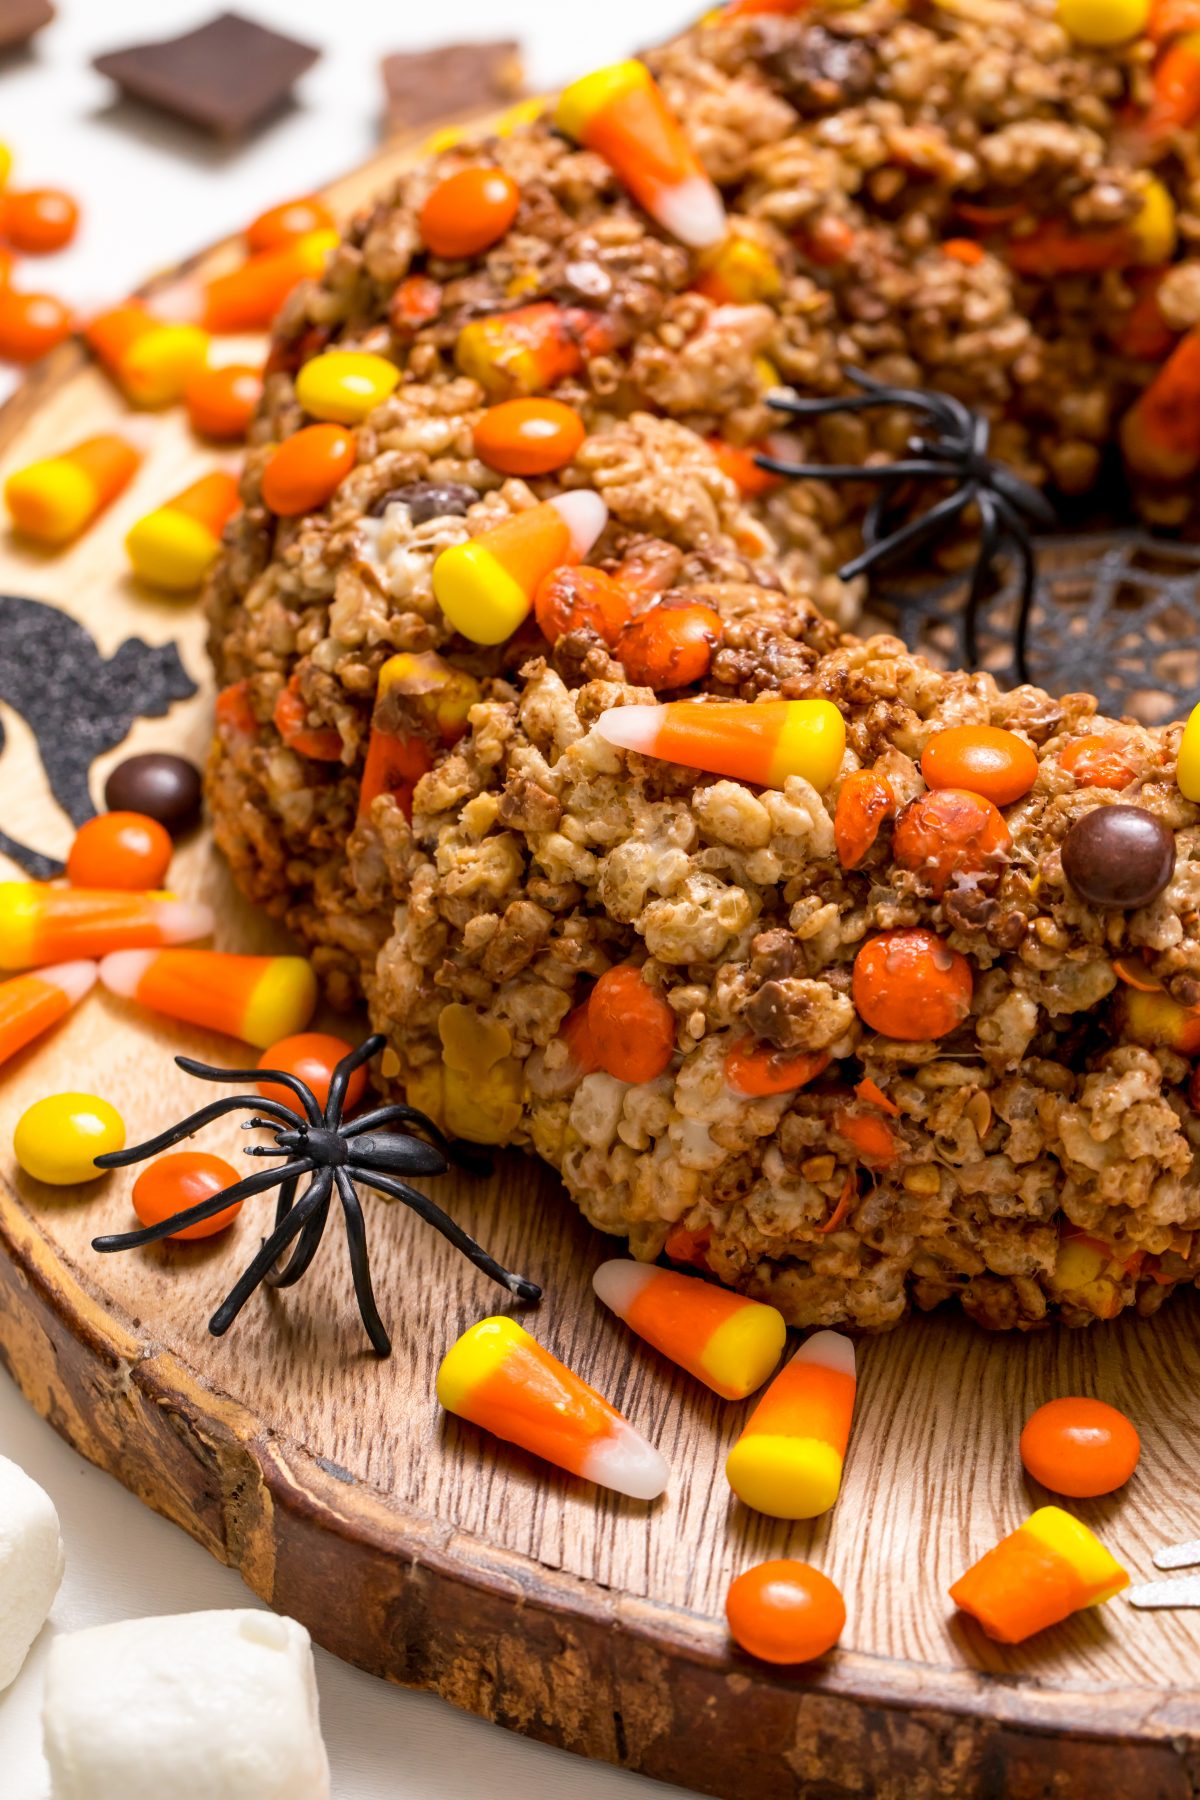 A classic treat with a Halloween twist!